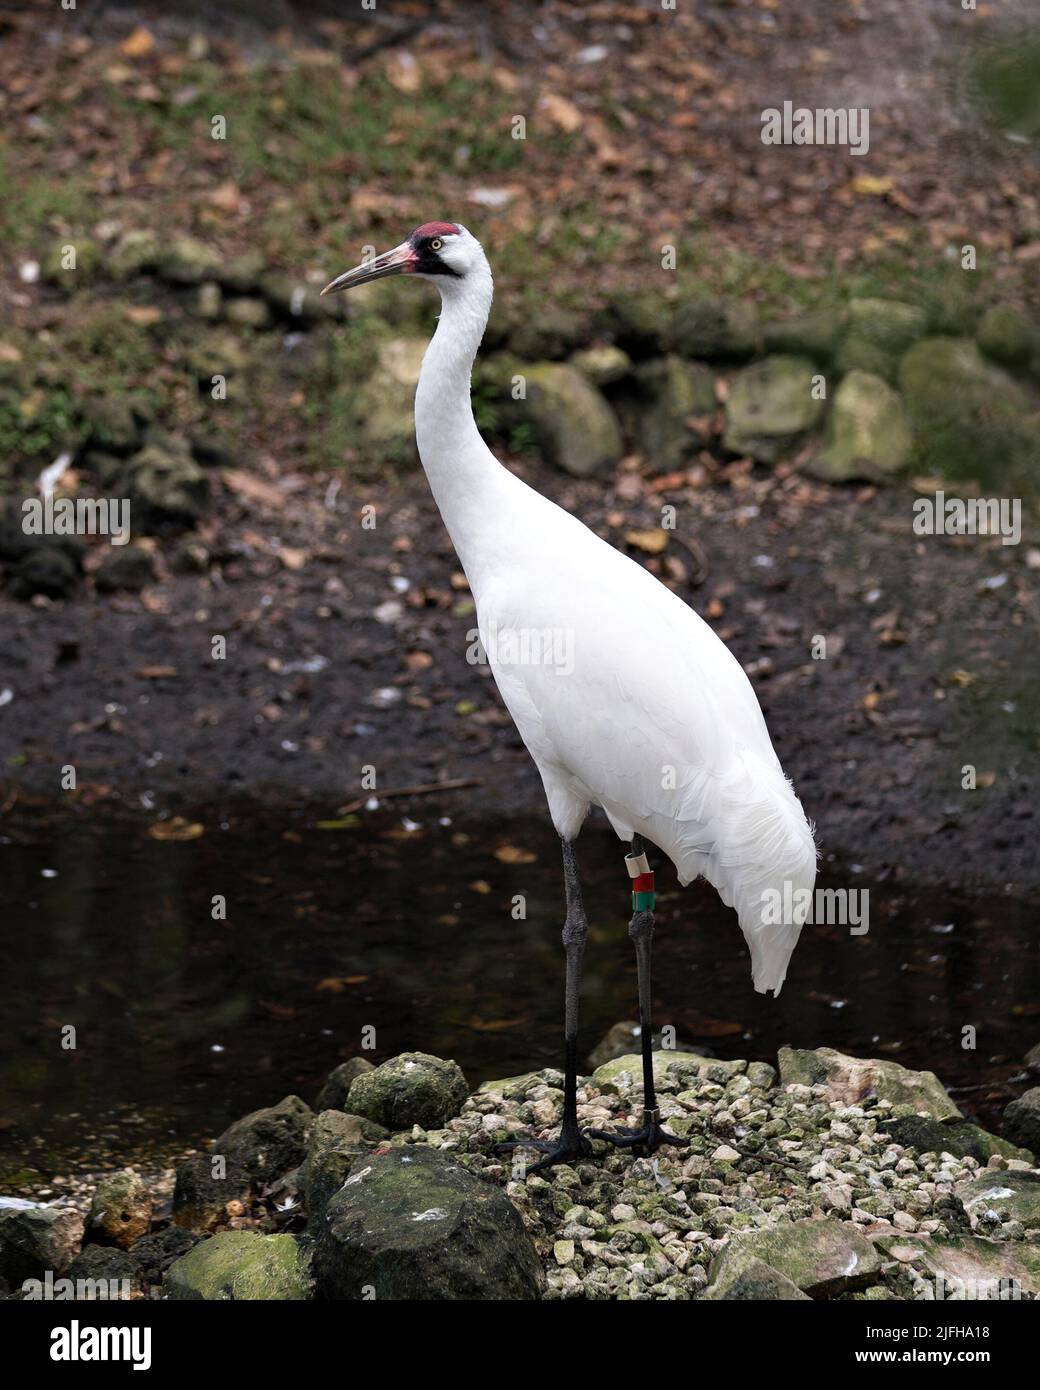 Whopping Crane close up side view displaying its red crown on its head, eye, beak and white feather plumage in its habitat surrounding and environment Stock Photo